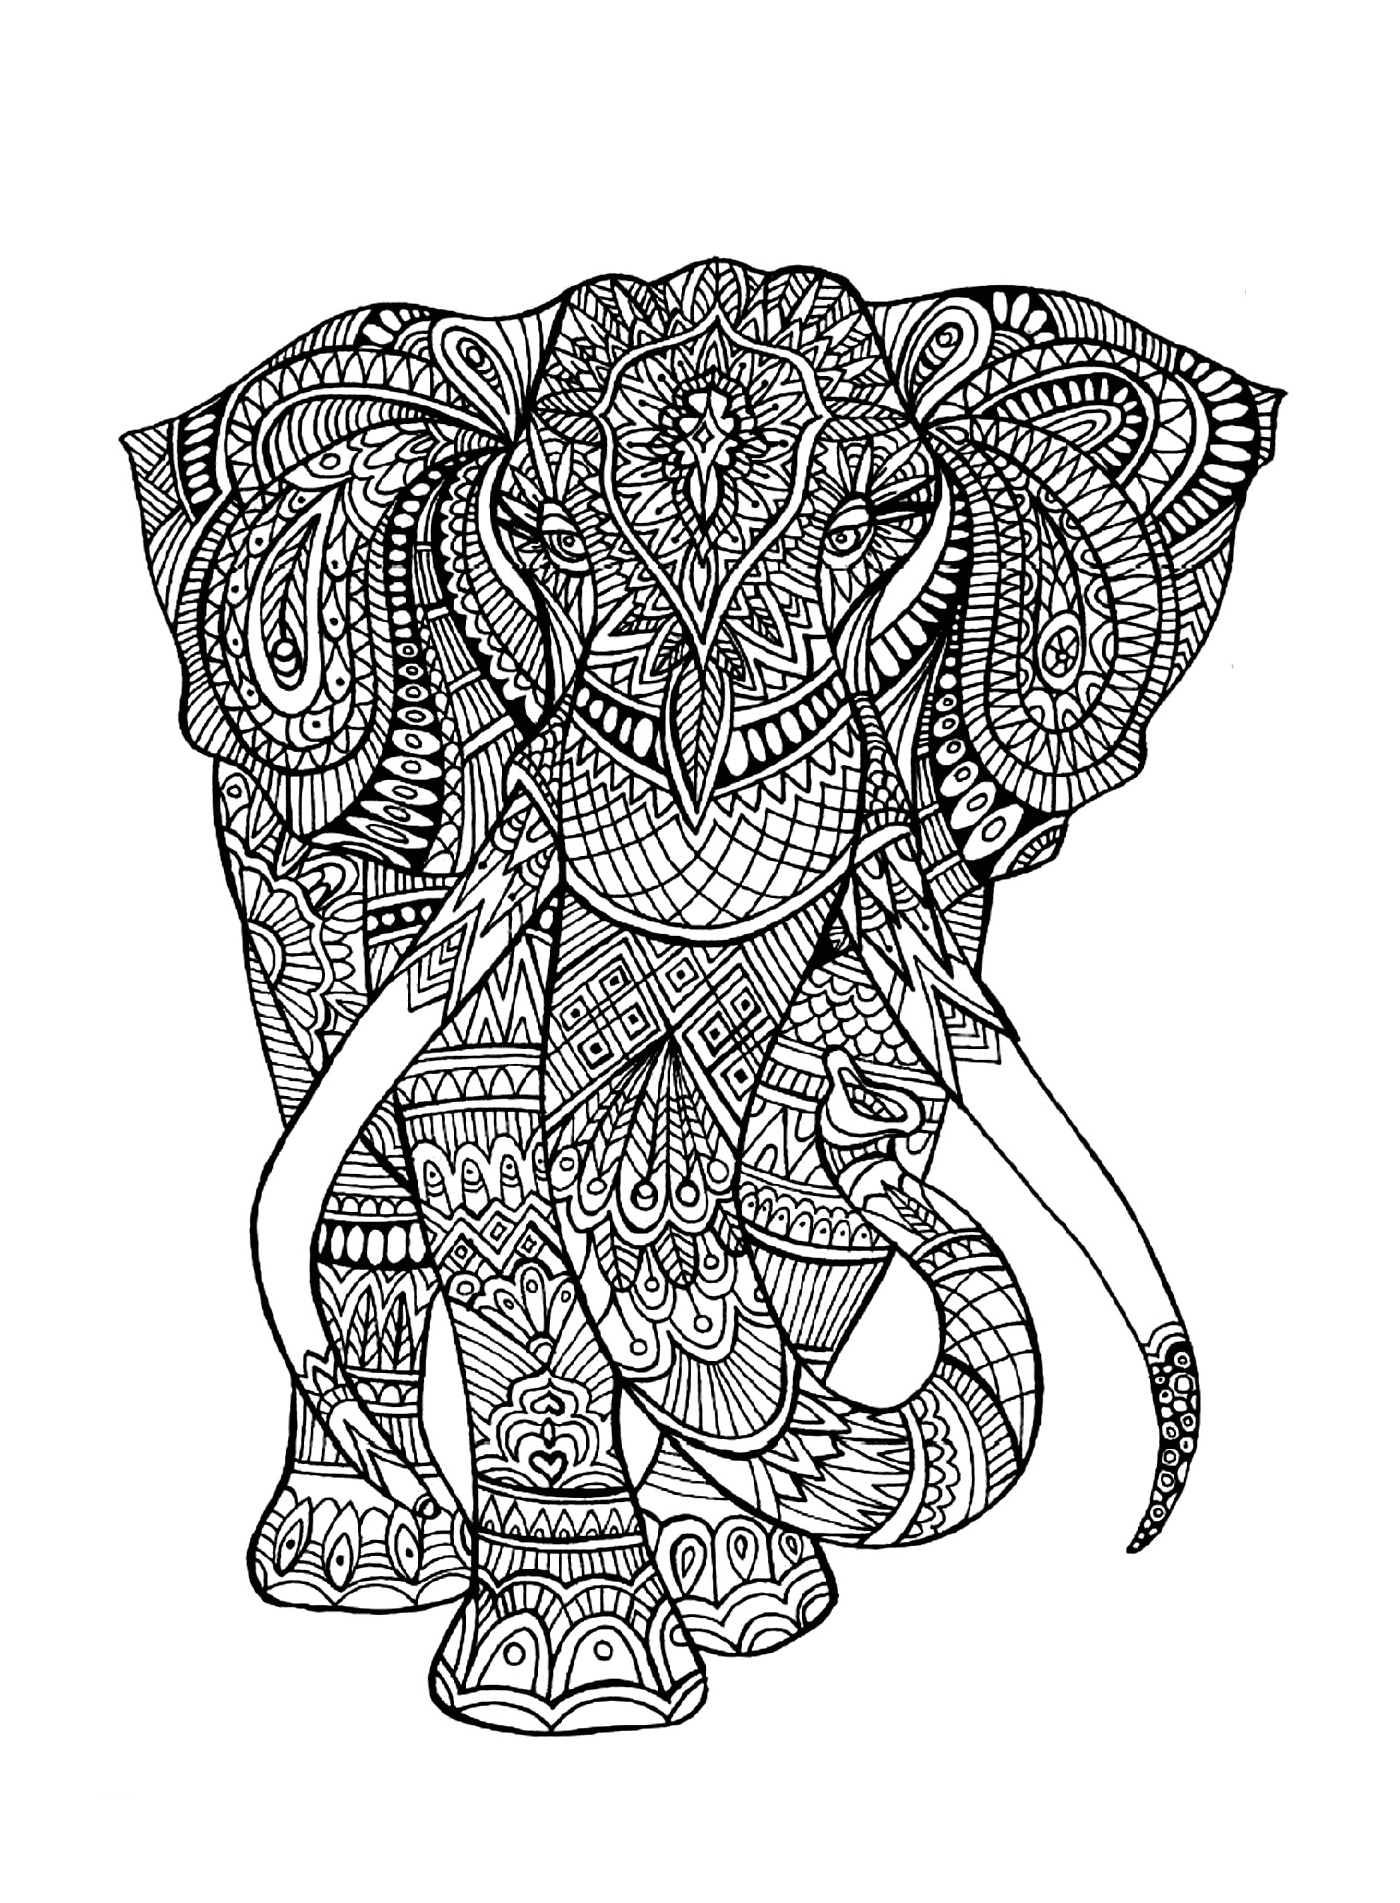  An elephant with complex patterns on his body 